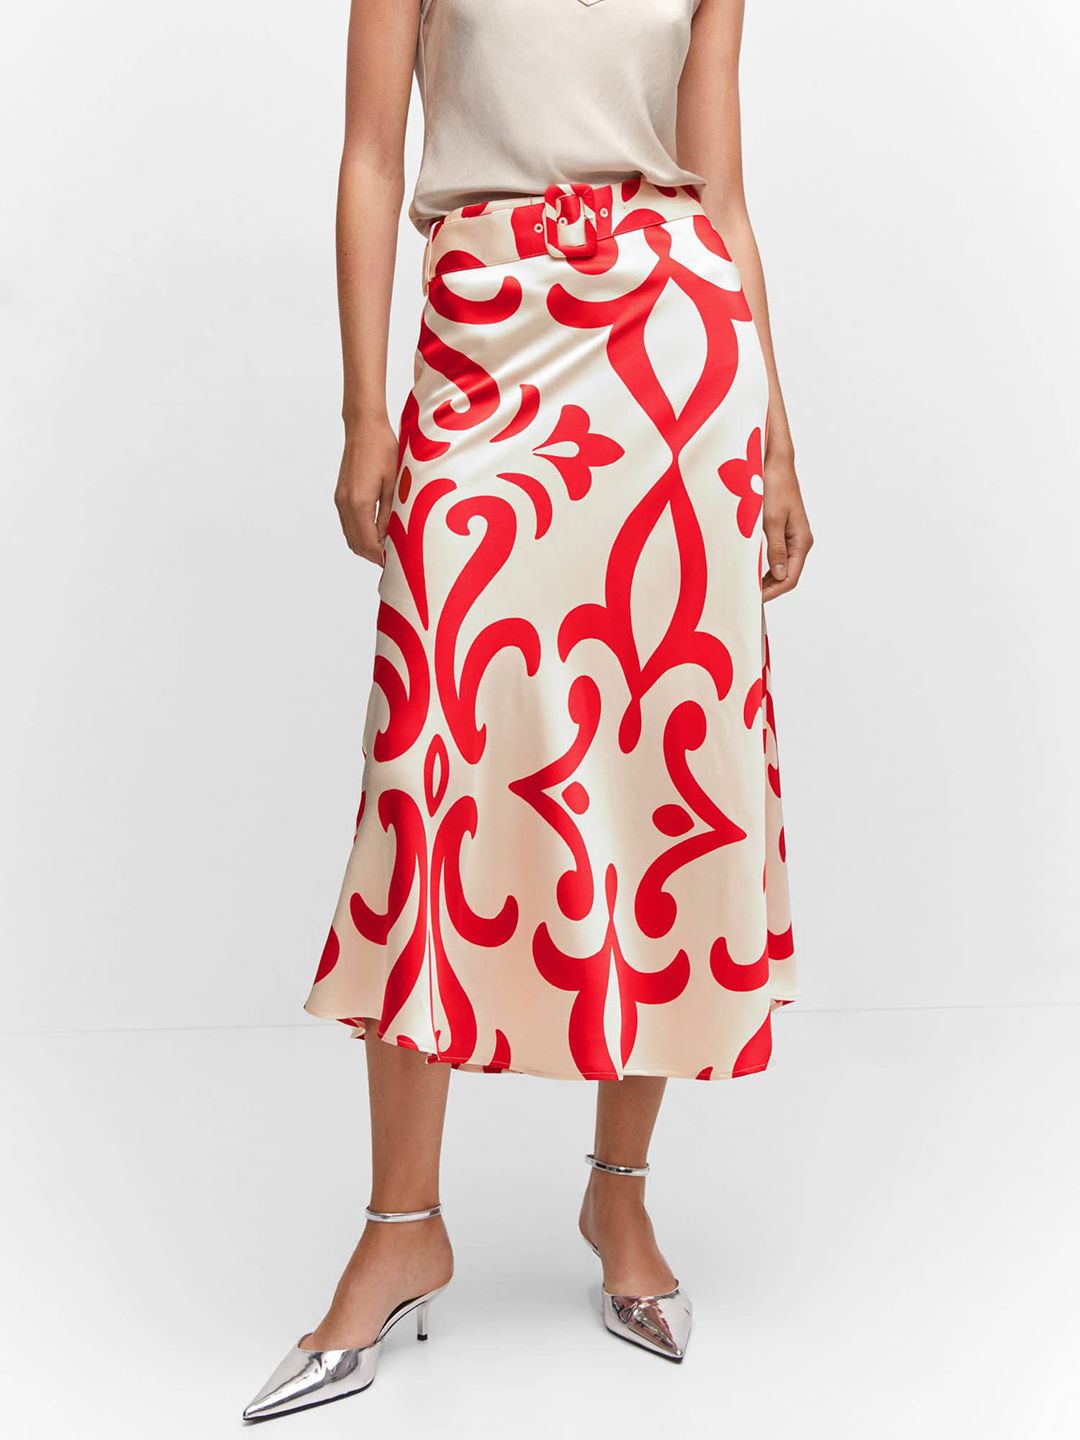 MANGO Satin Finish Floral Printed A-Line Midi Skirt Price in India